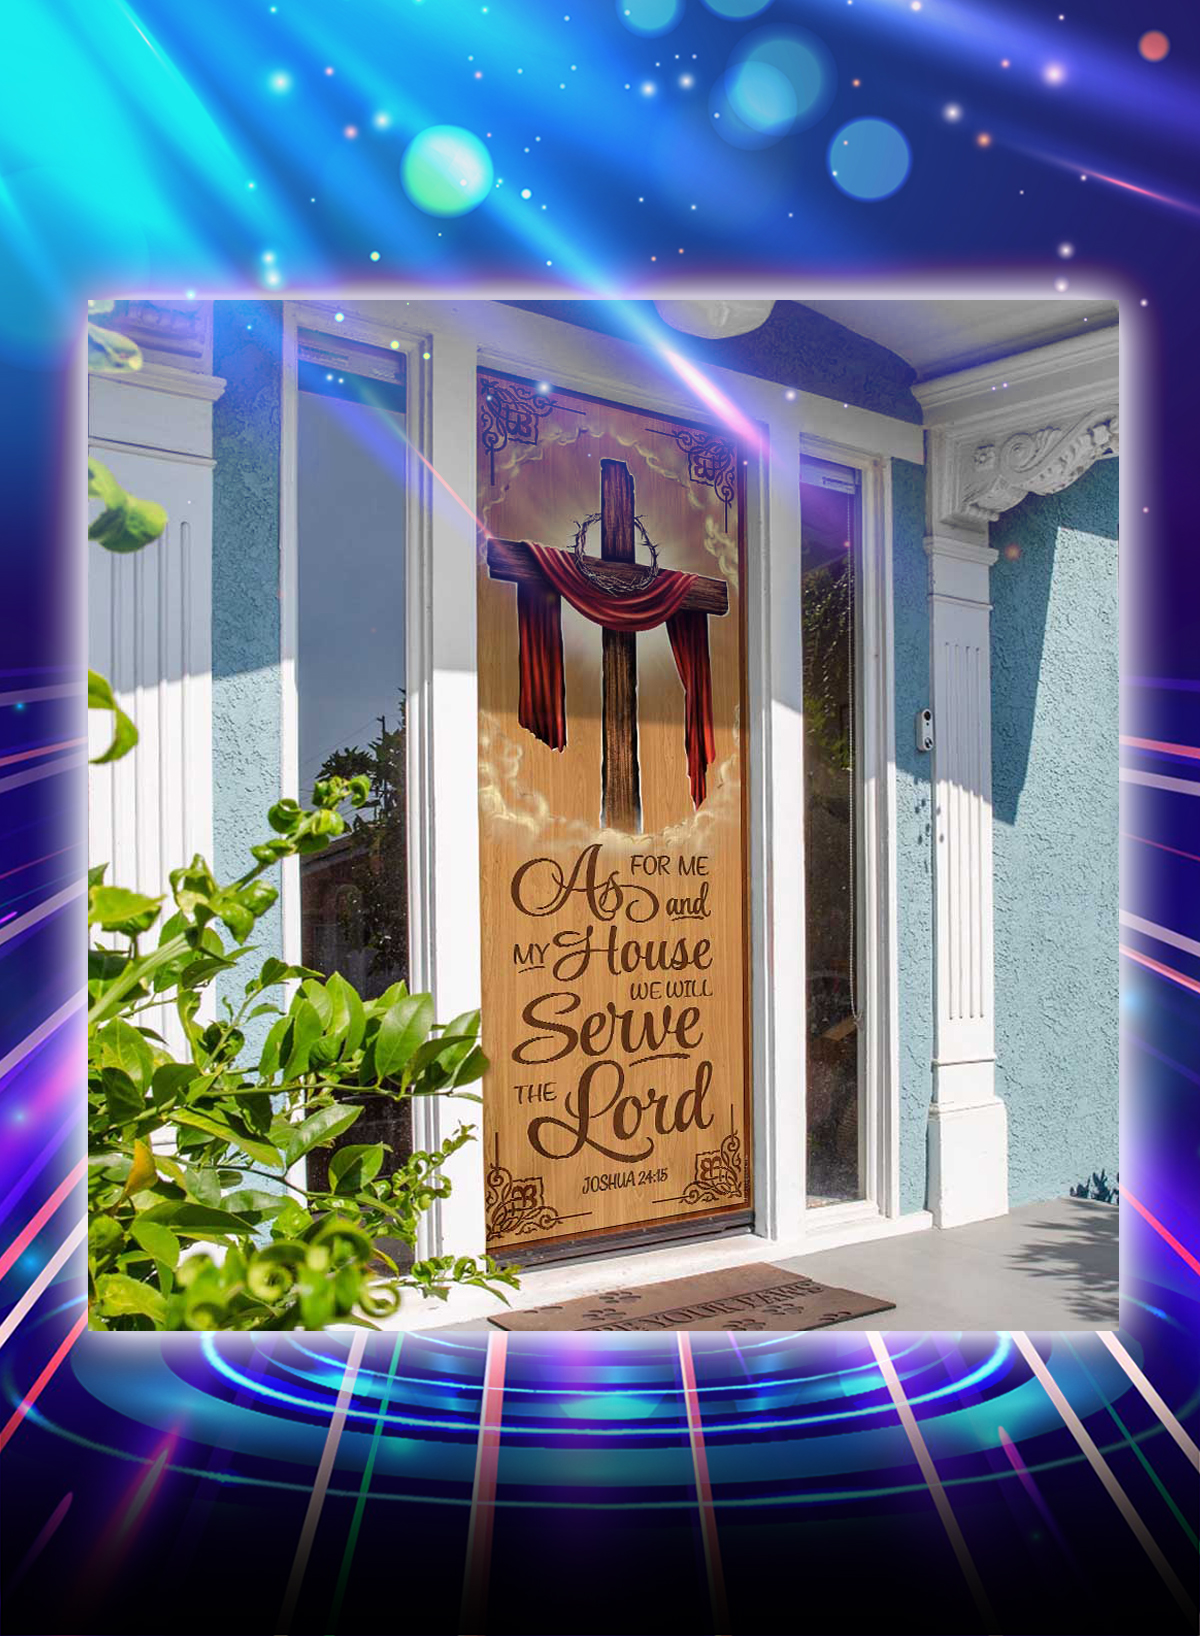 As for me and my house we will serve the lord door cover - Picture 1